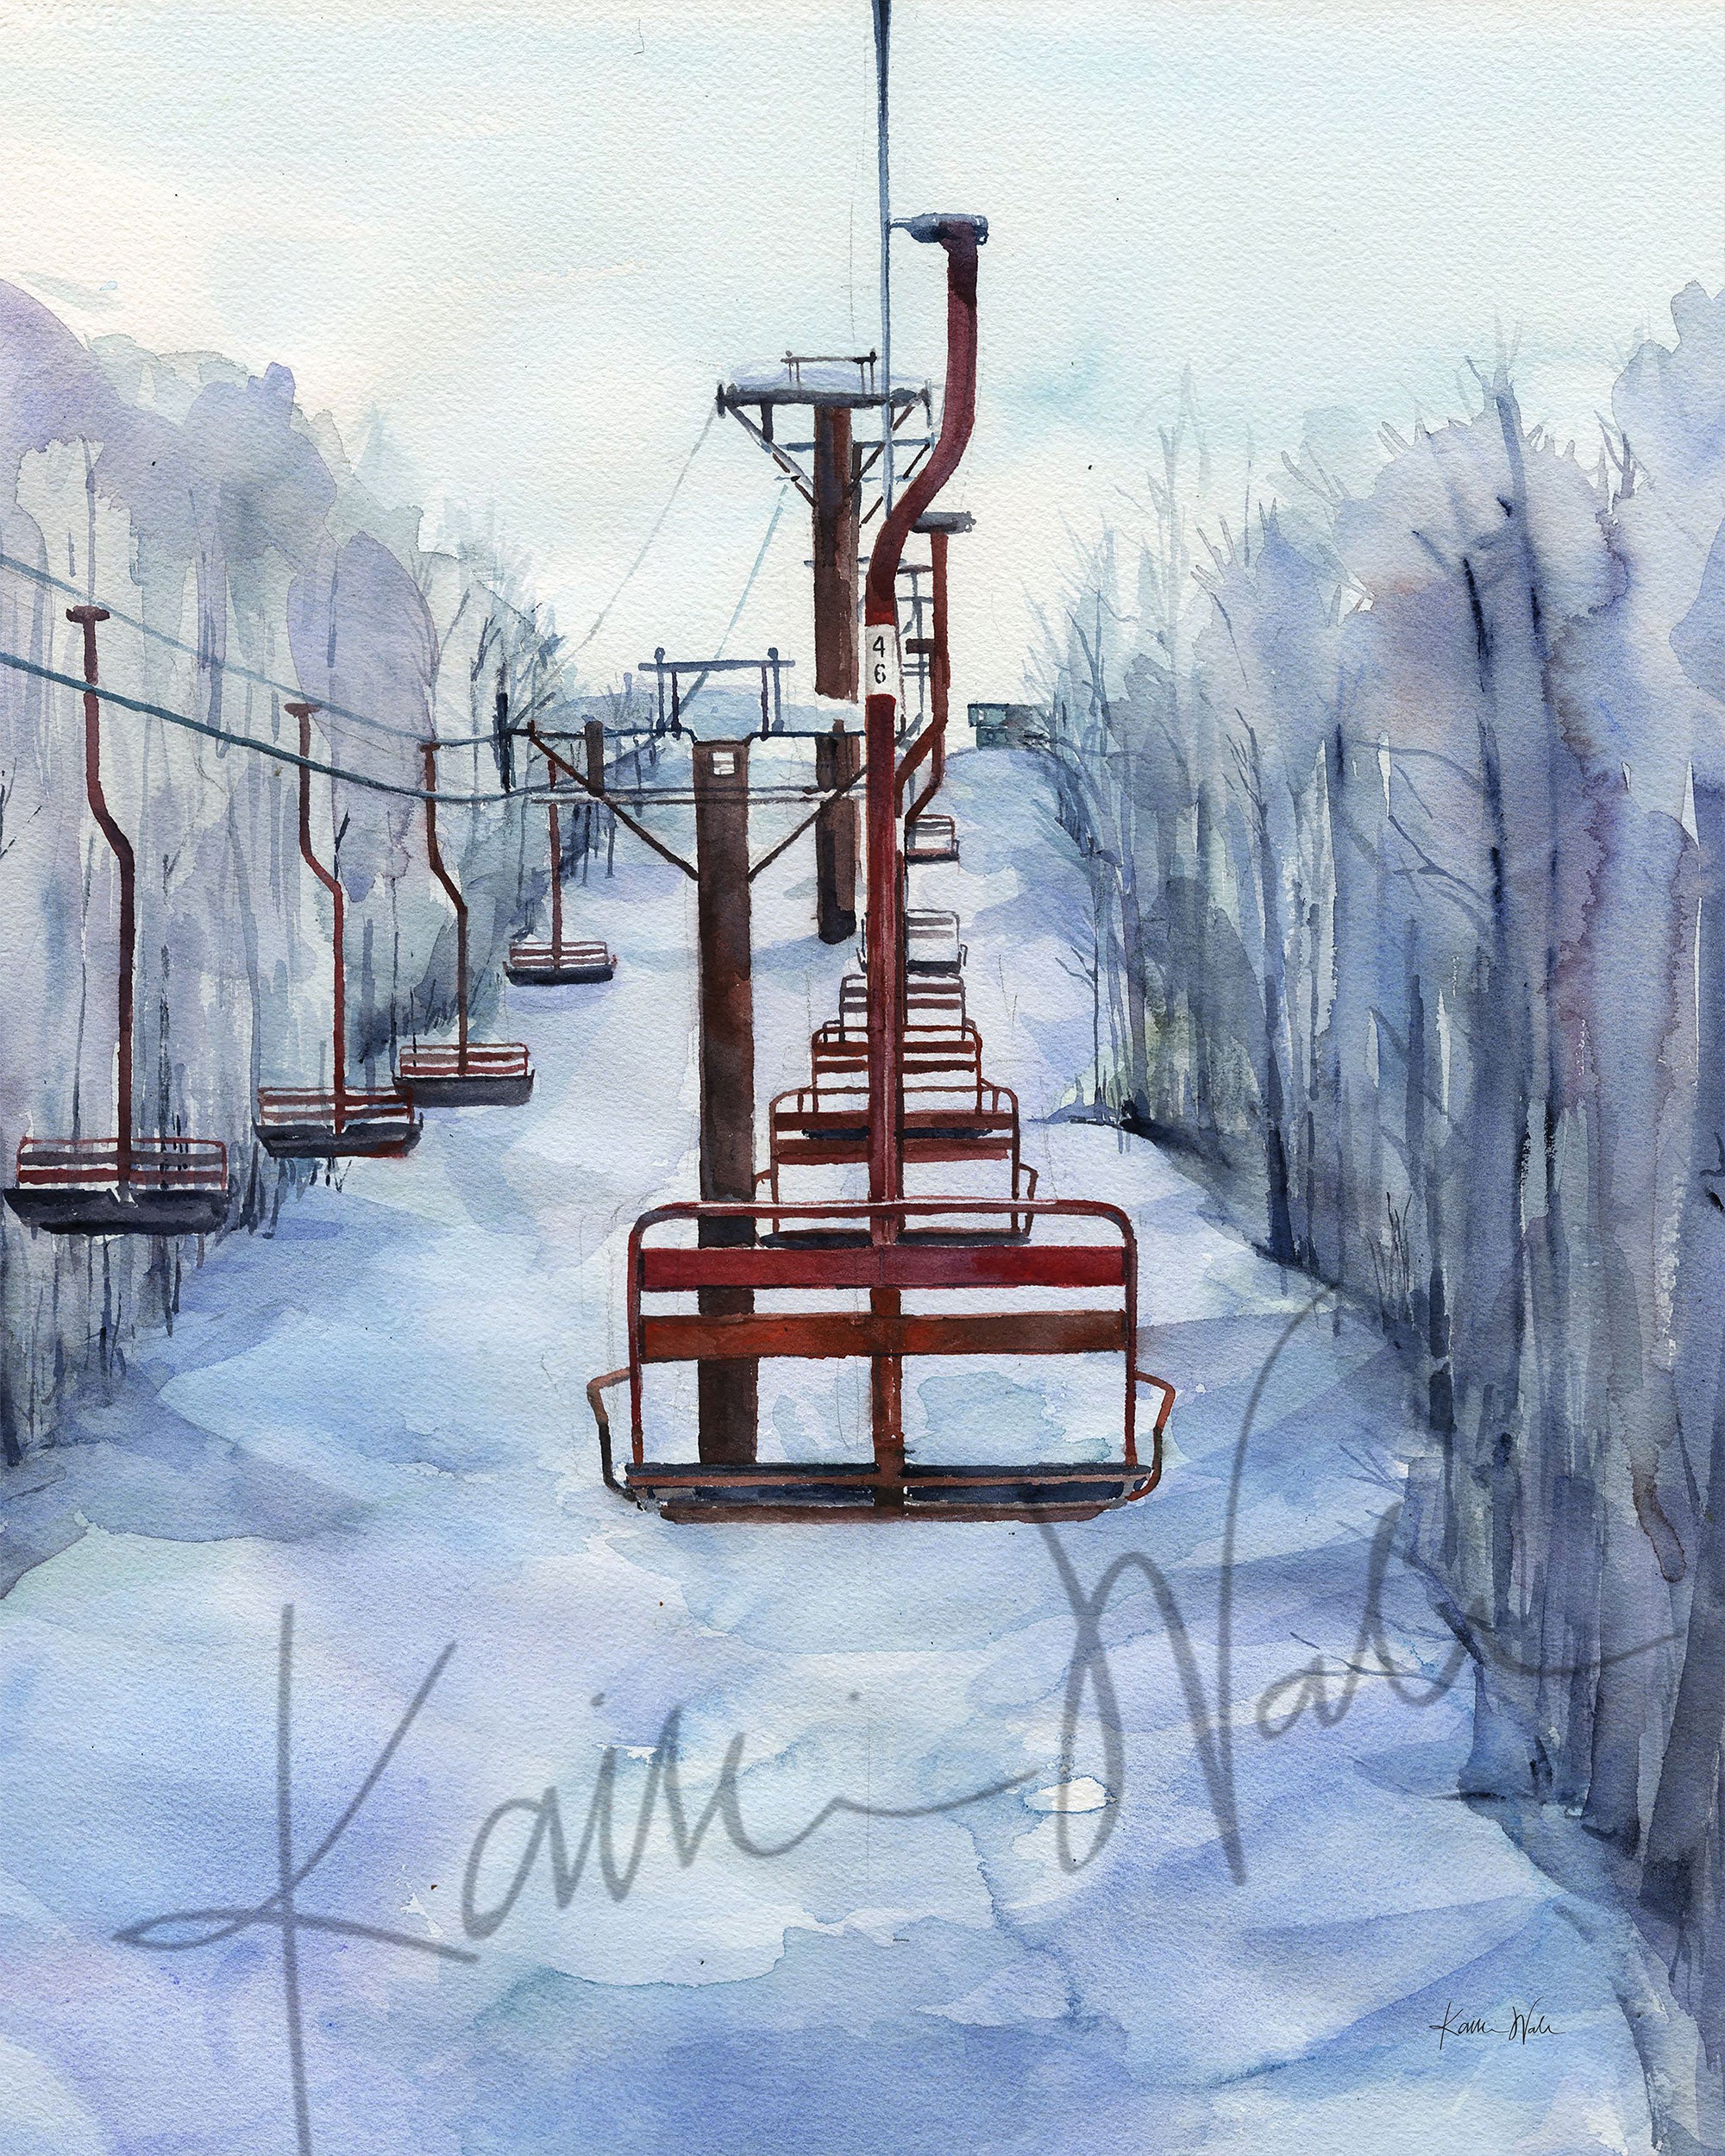 Unframed watercolor painting of chairlifts in a snowy scene.